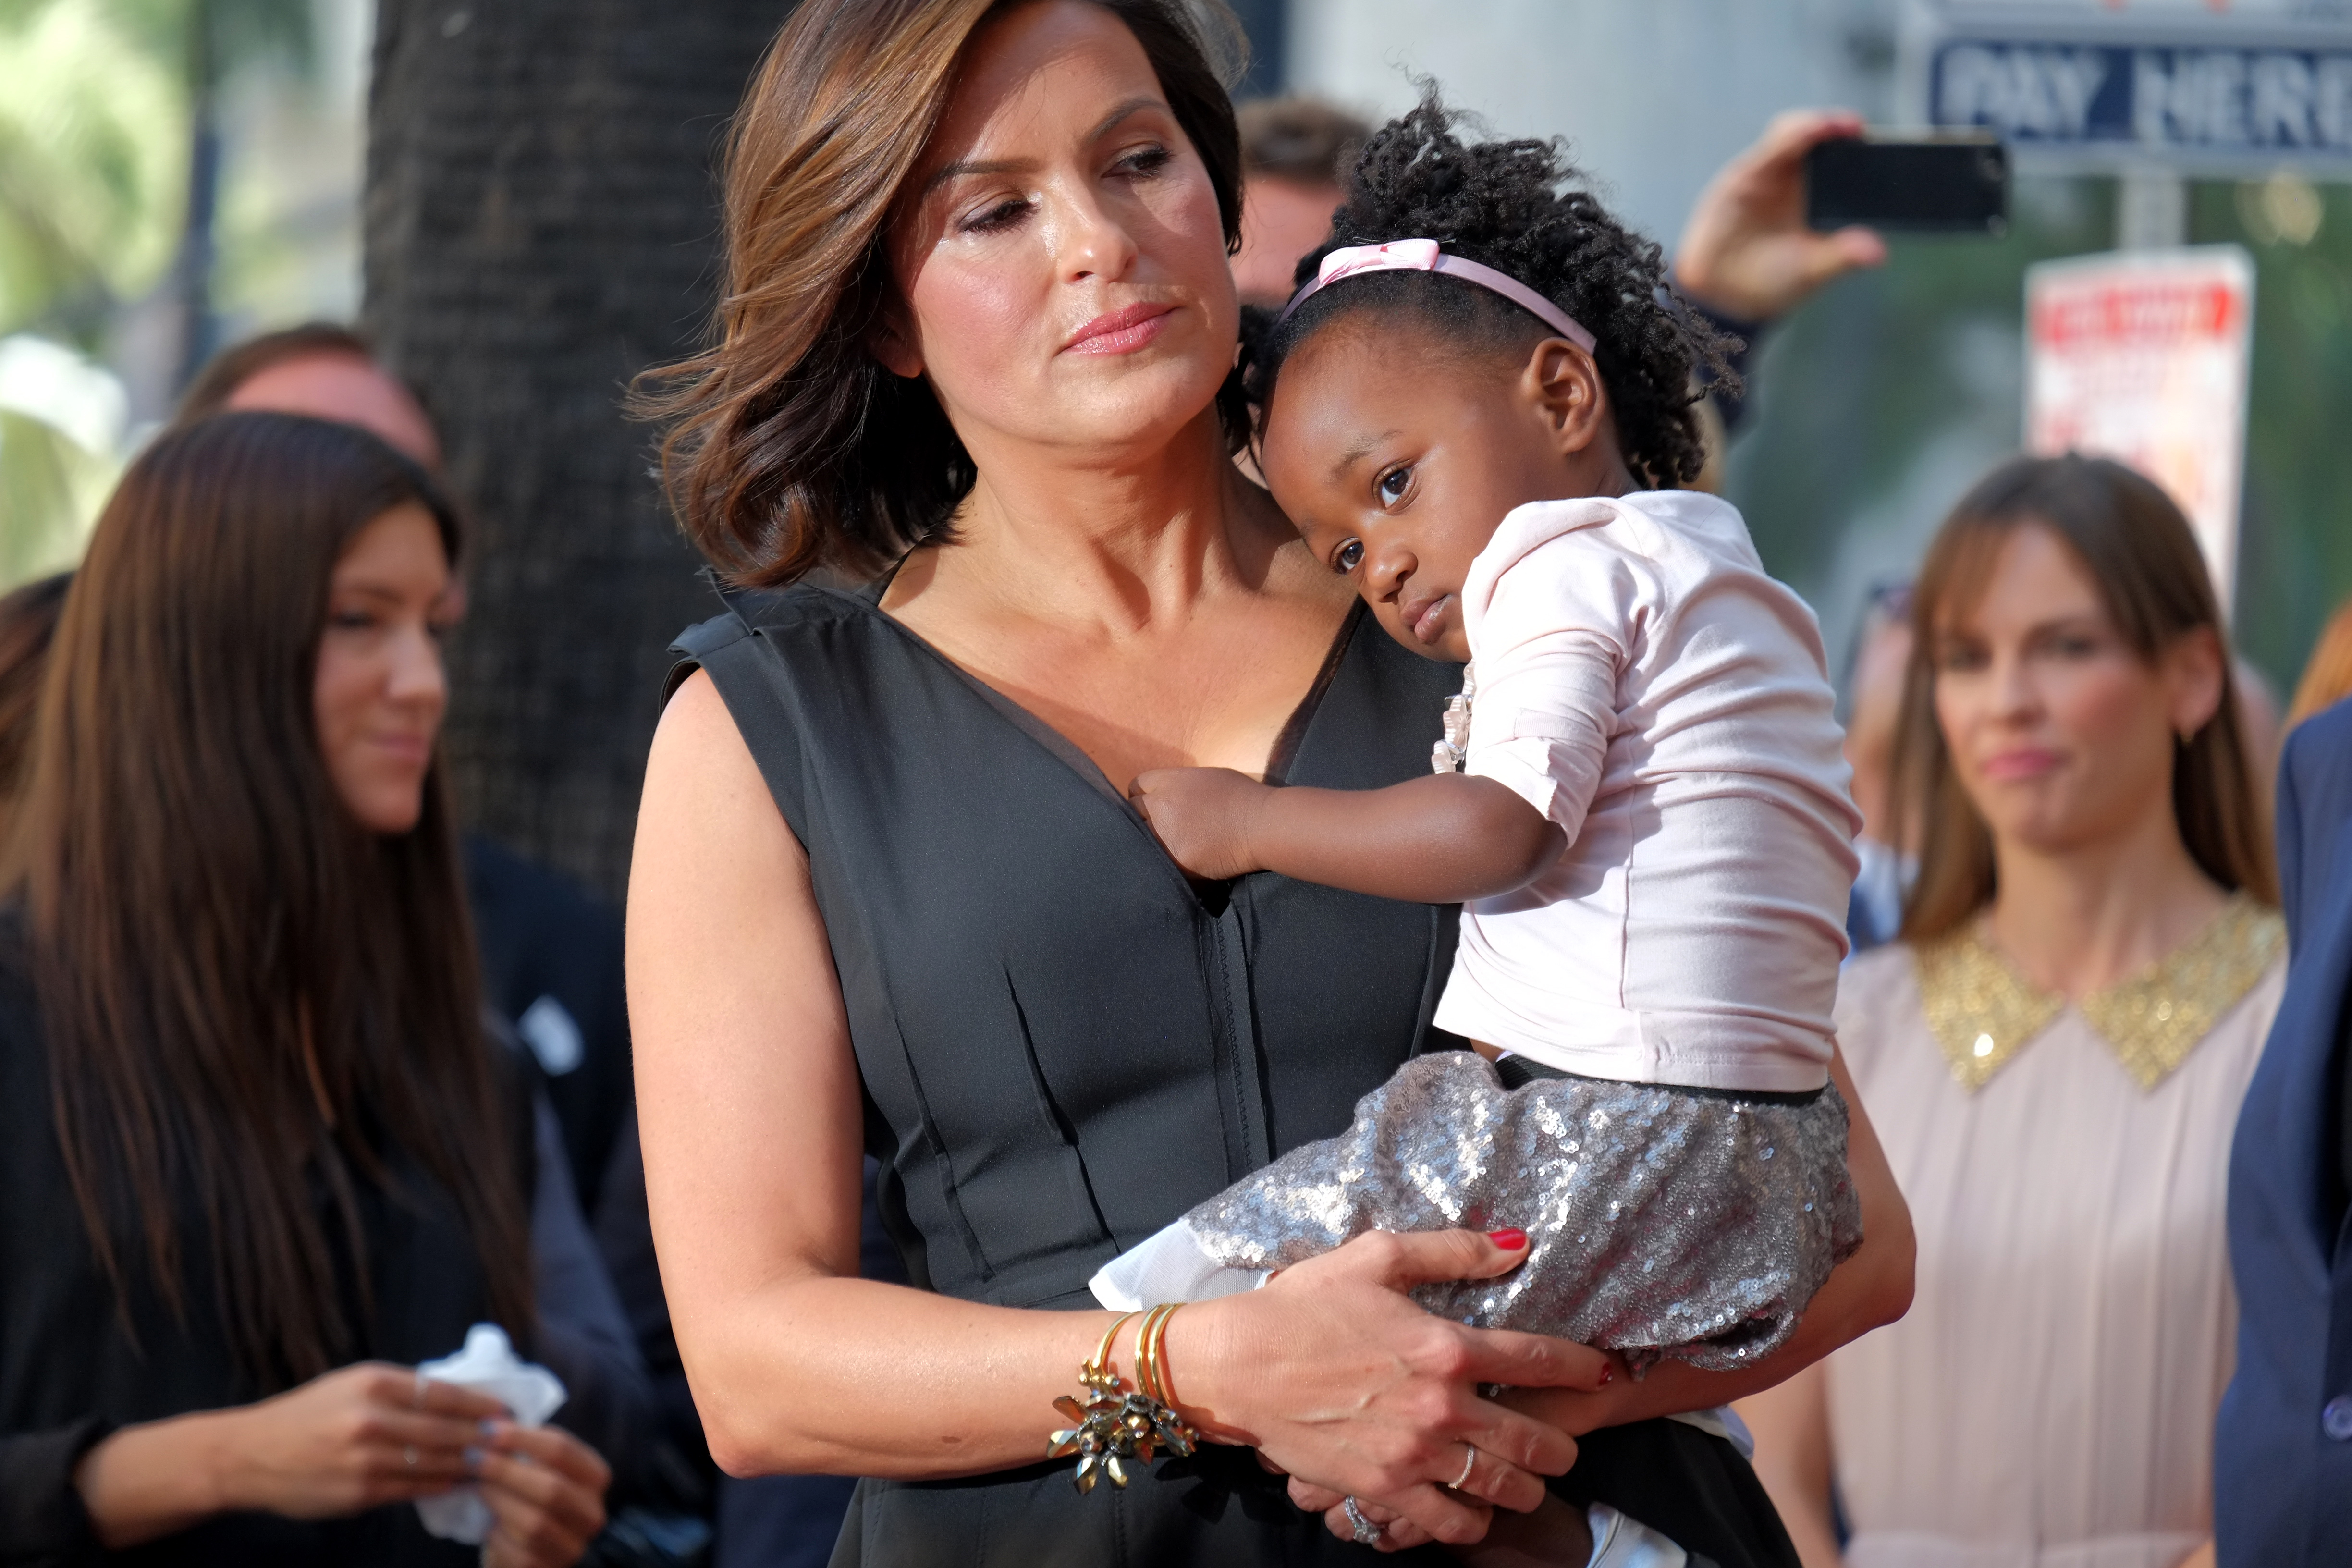 Mariska Hargitay and her daughter, Amaya, share a special moment at the Hollywood Walk of Fame ceremony on November 8, 2013 as the actress was honored with a star in Hollywood, California | Source: Getty Images